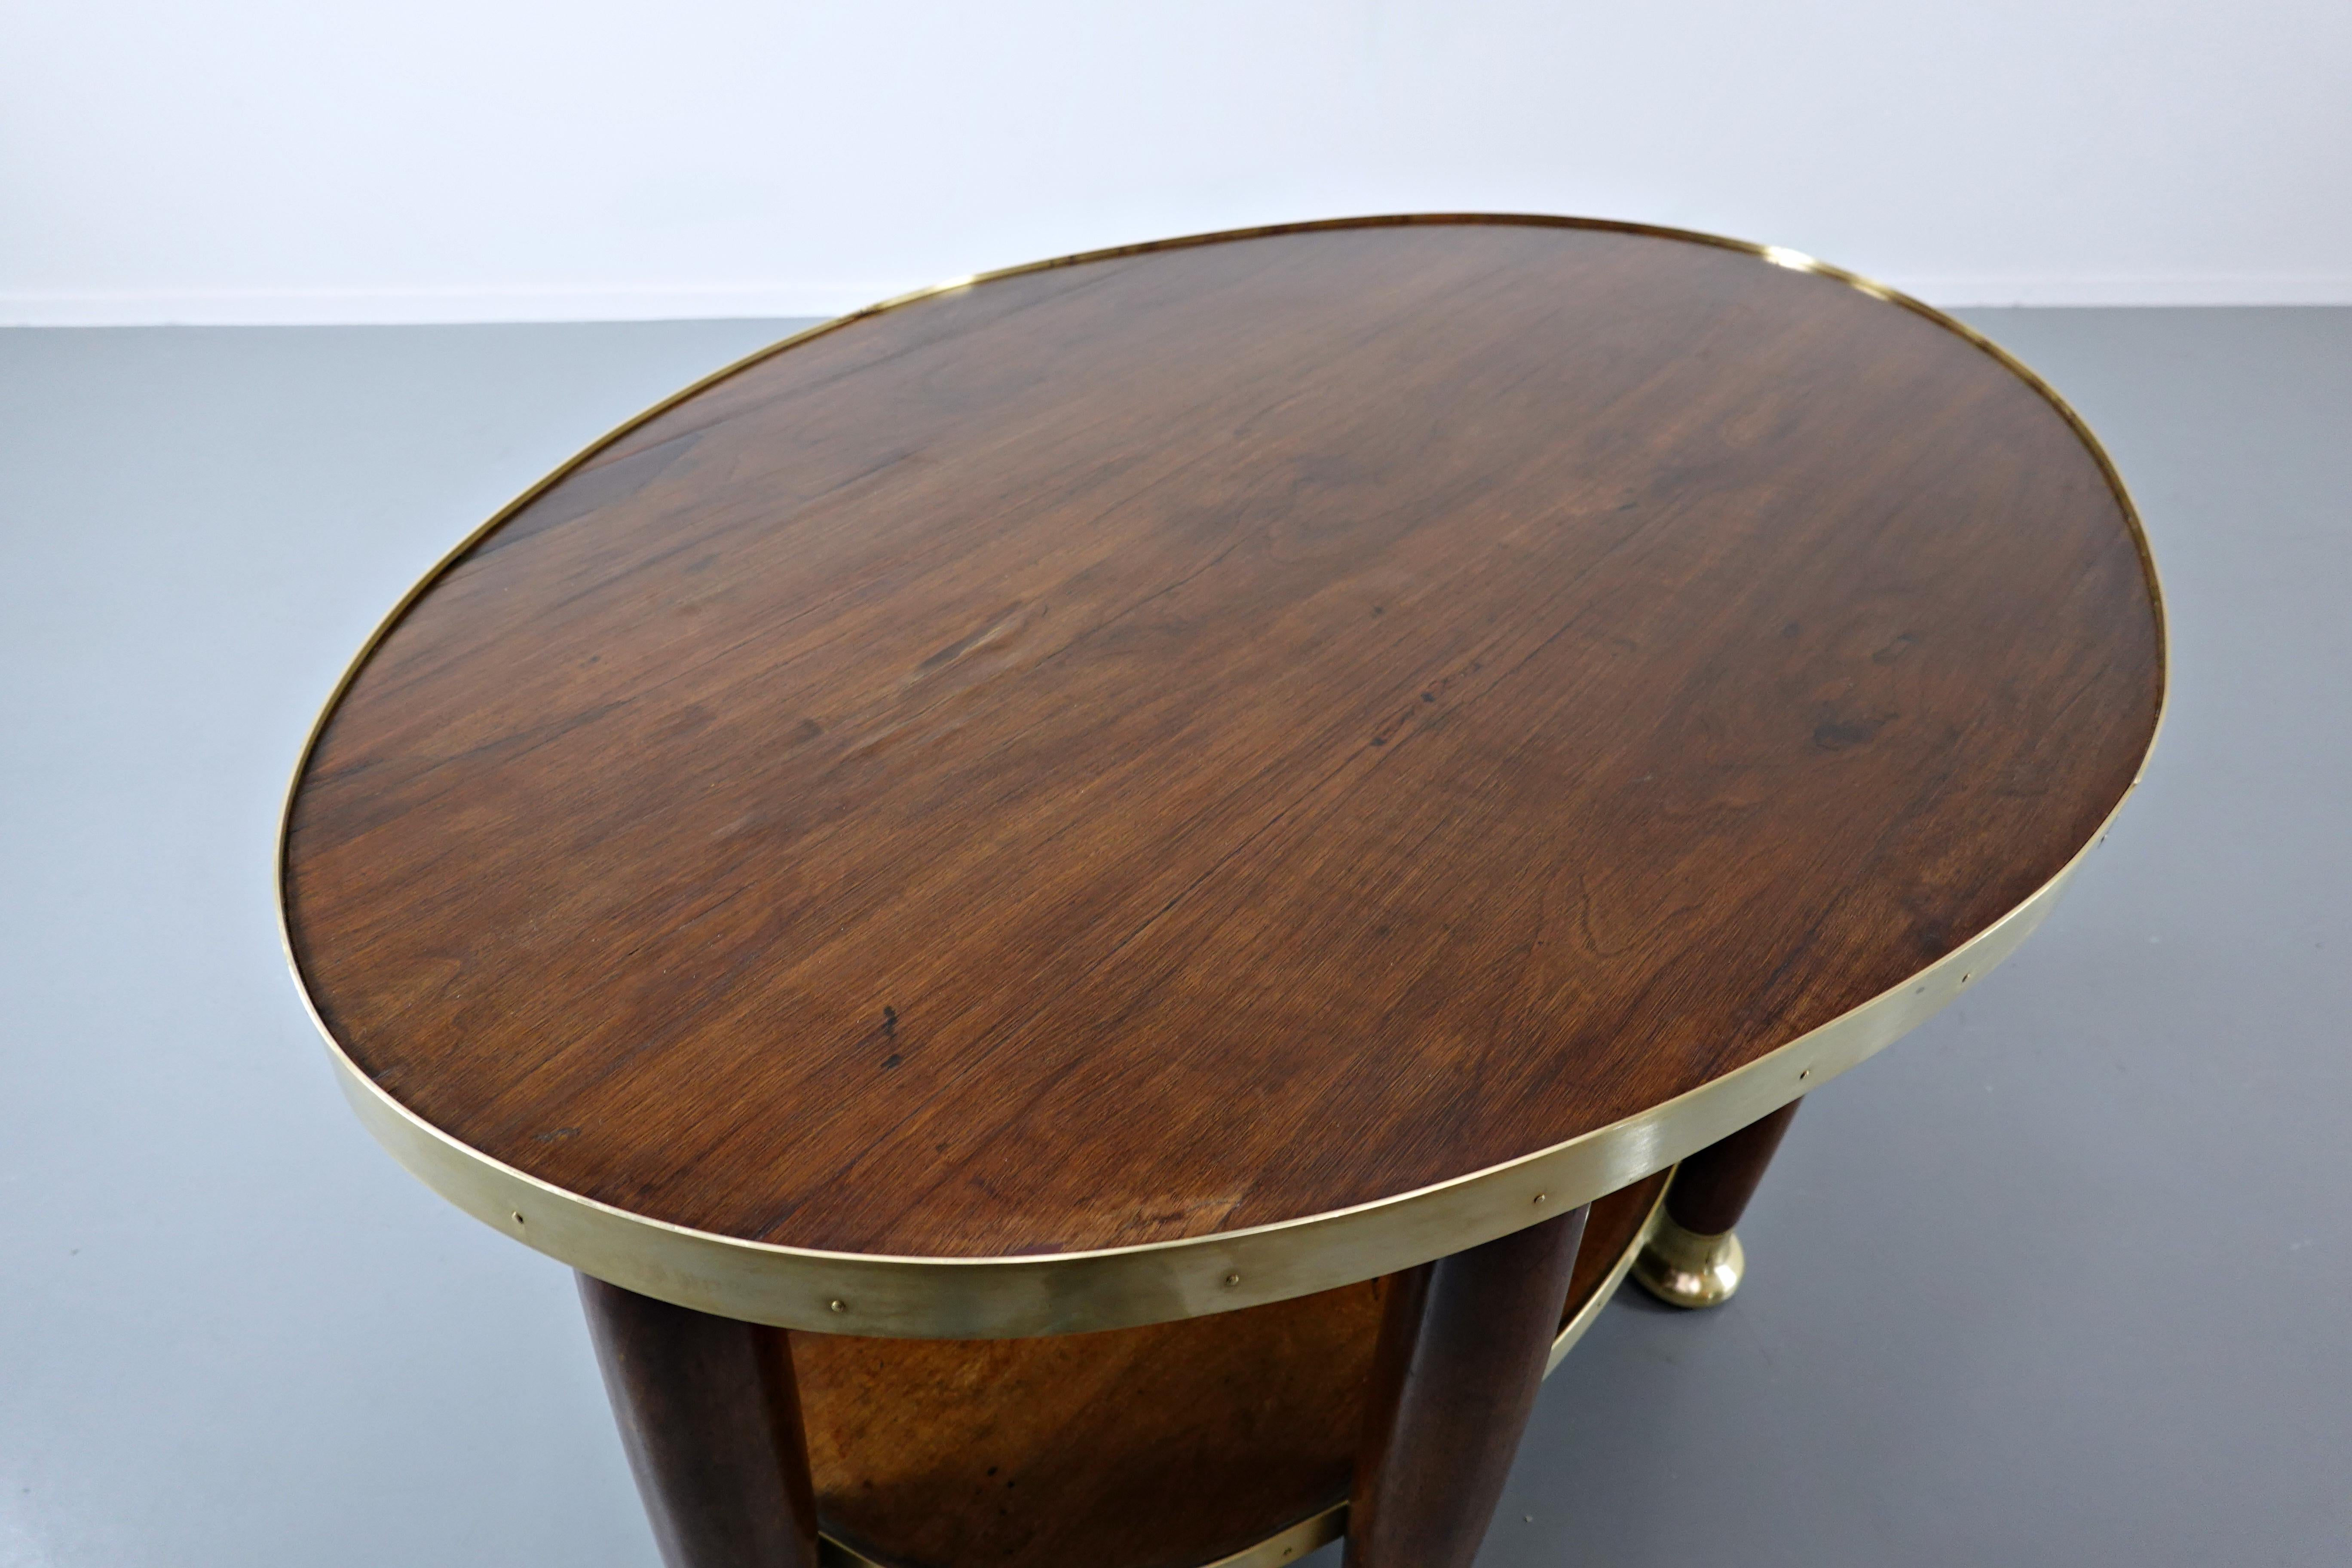 Art Nouveau Table in the Style of Adolf Loos, Wood and Brass, circa 1910 For Sale 1